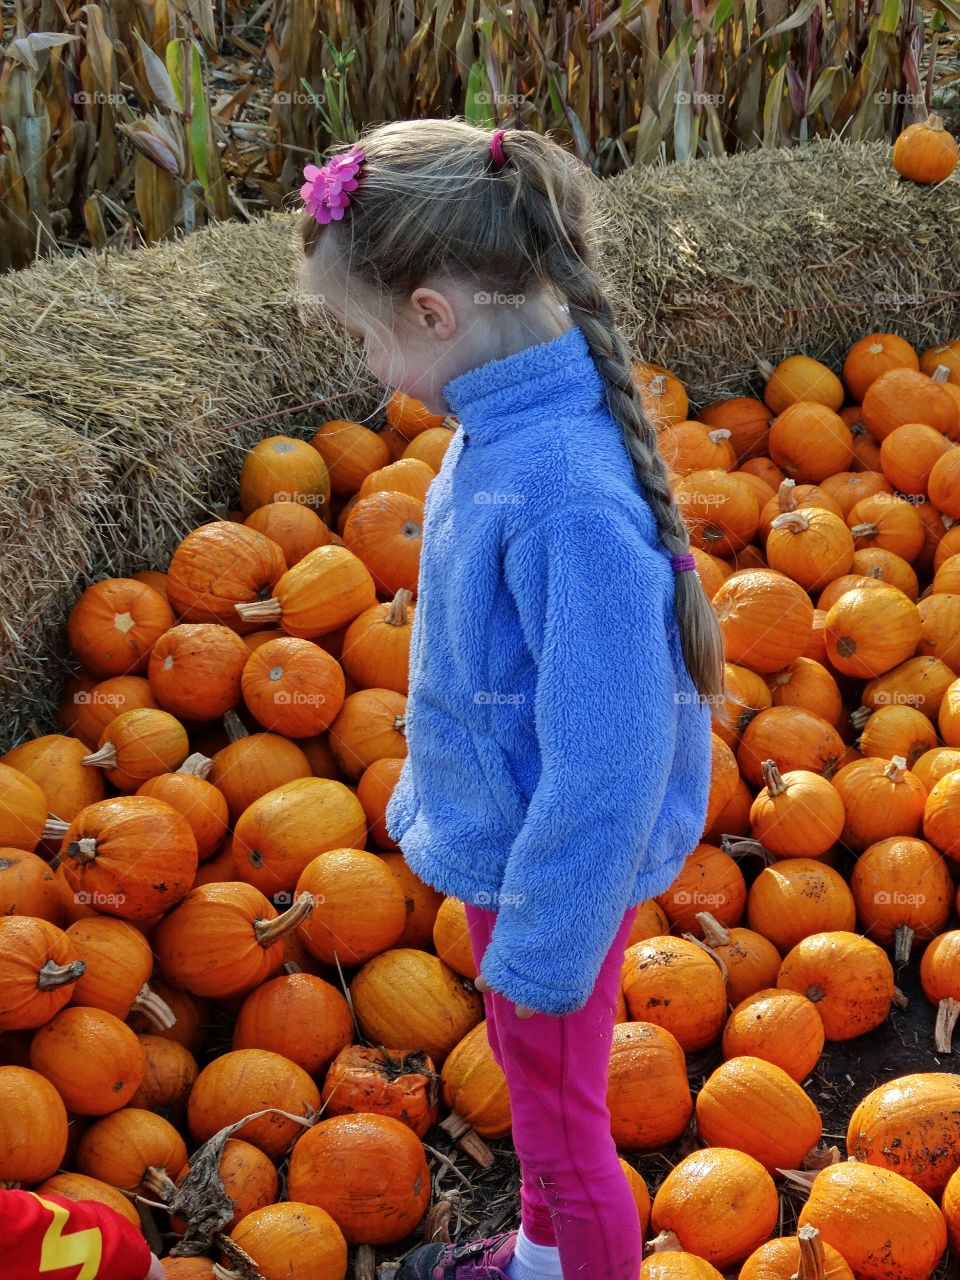 Young Girl In The Pumpkin Patch
